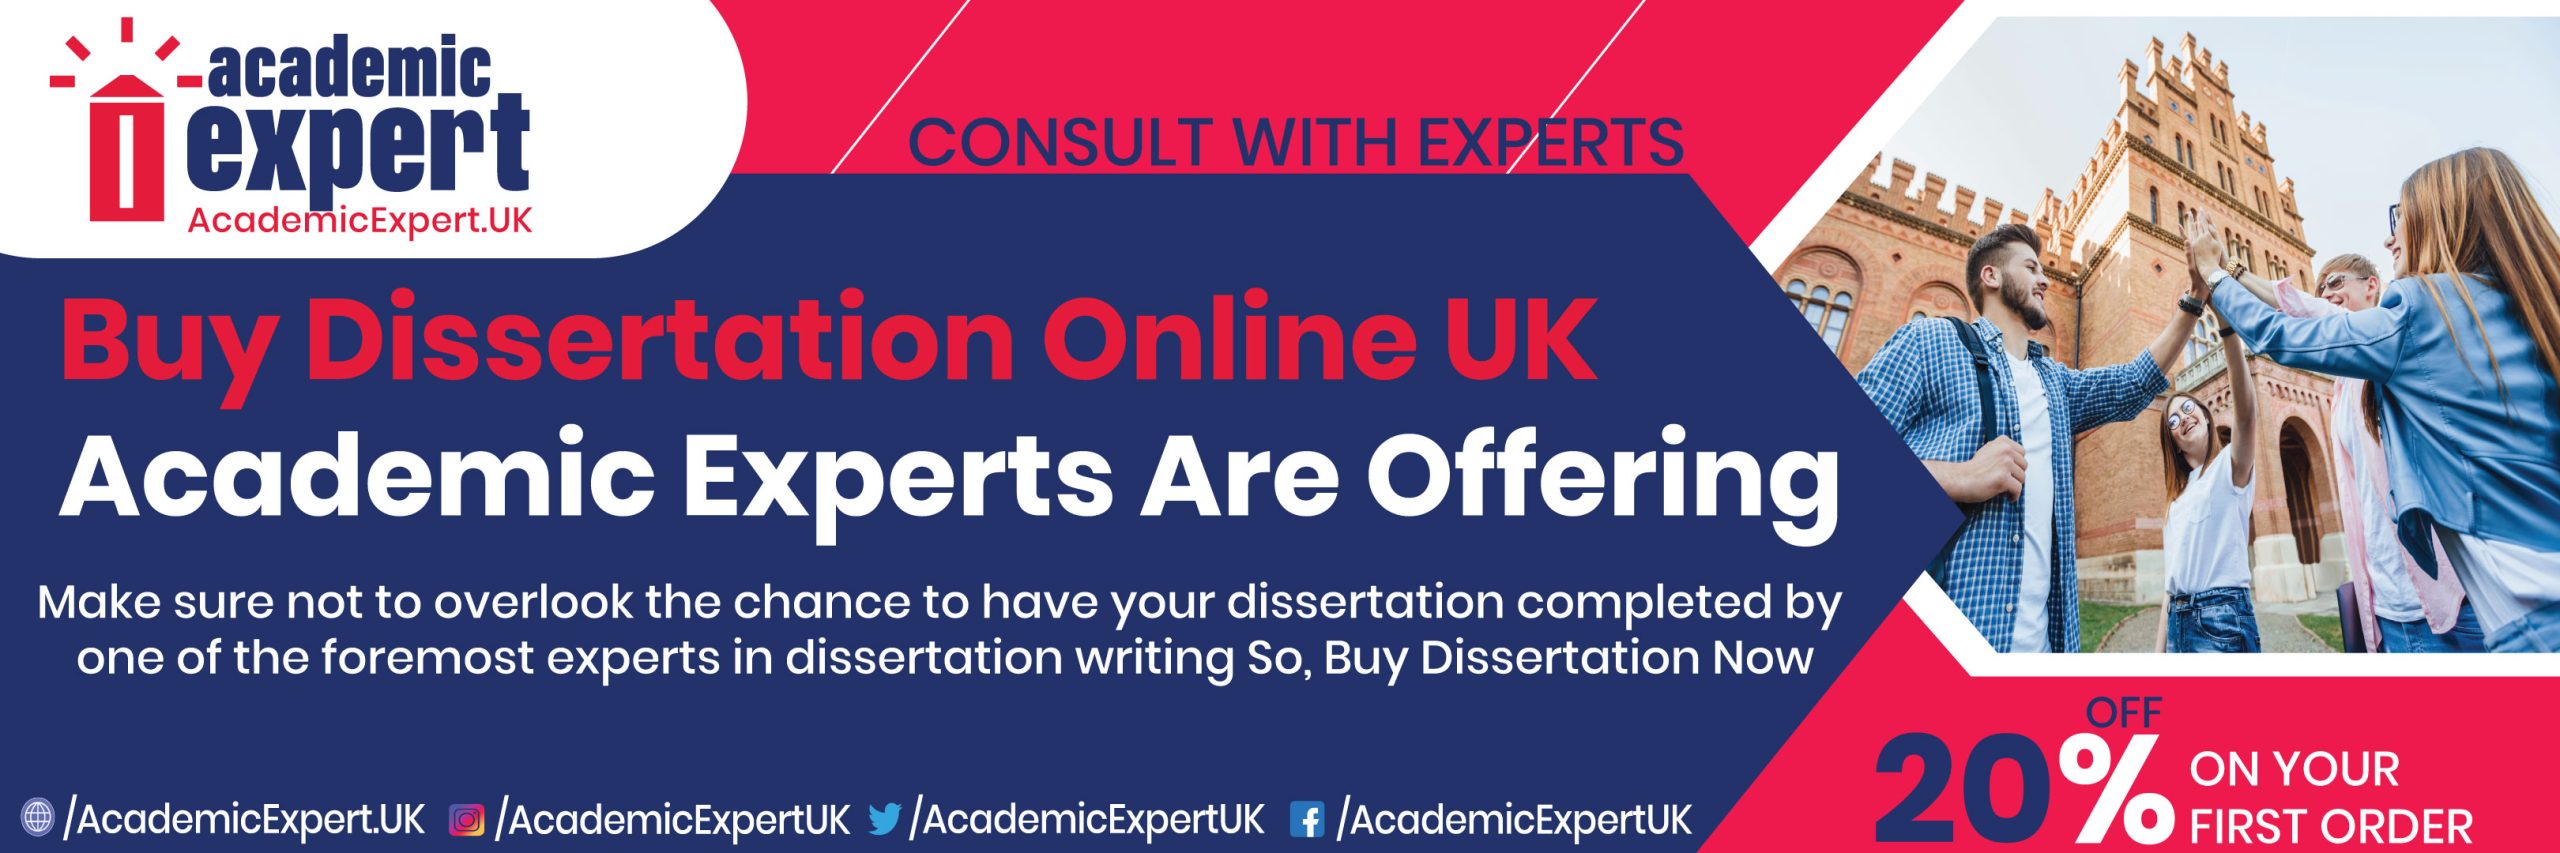 Buy Dissertation Online UK Academic Experts Are Offering